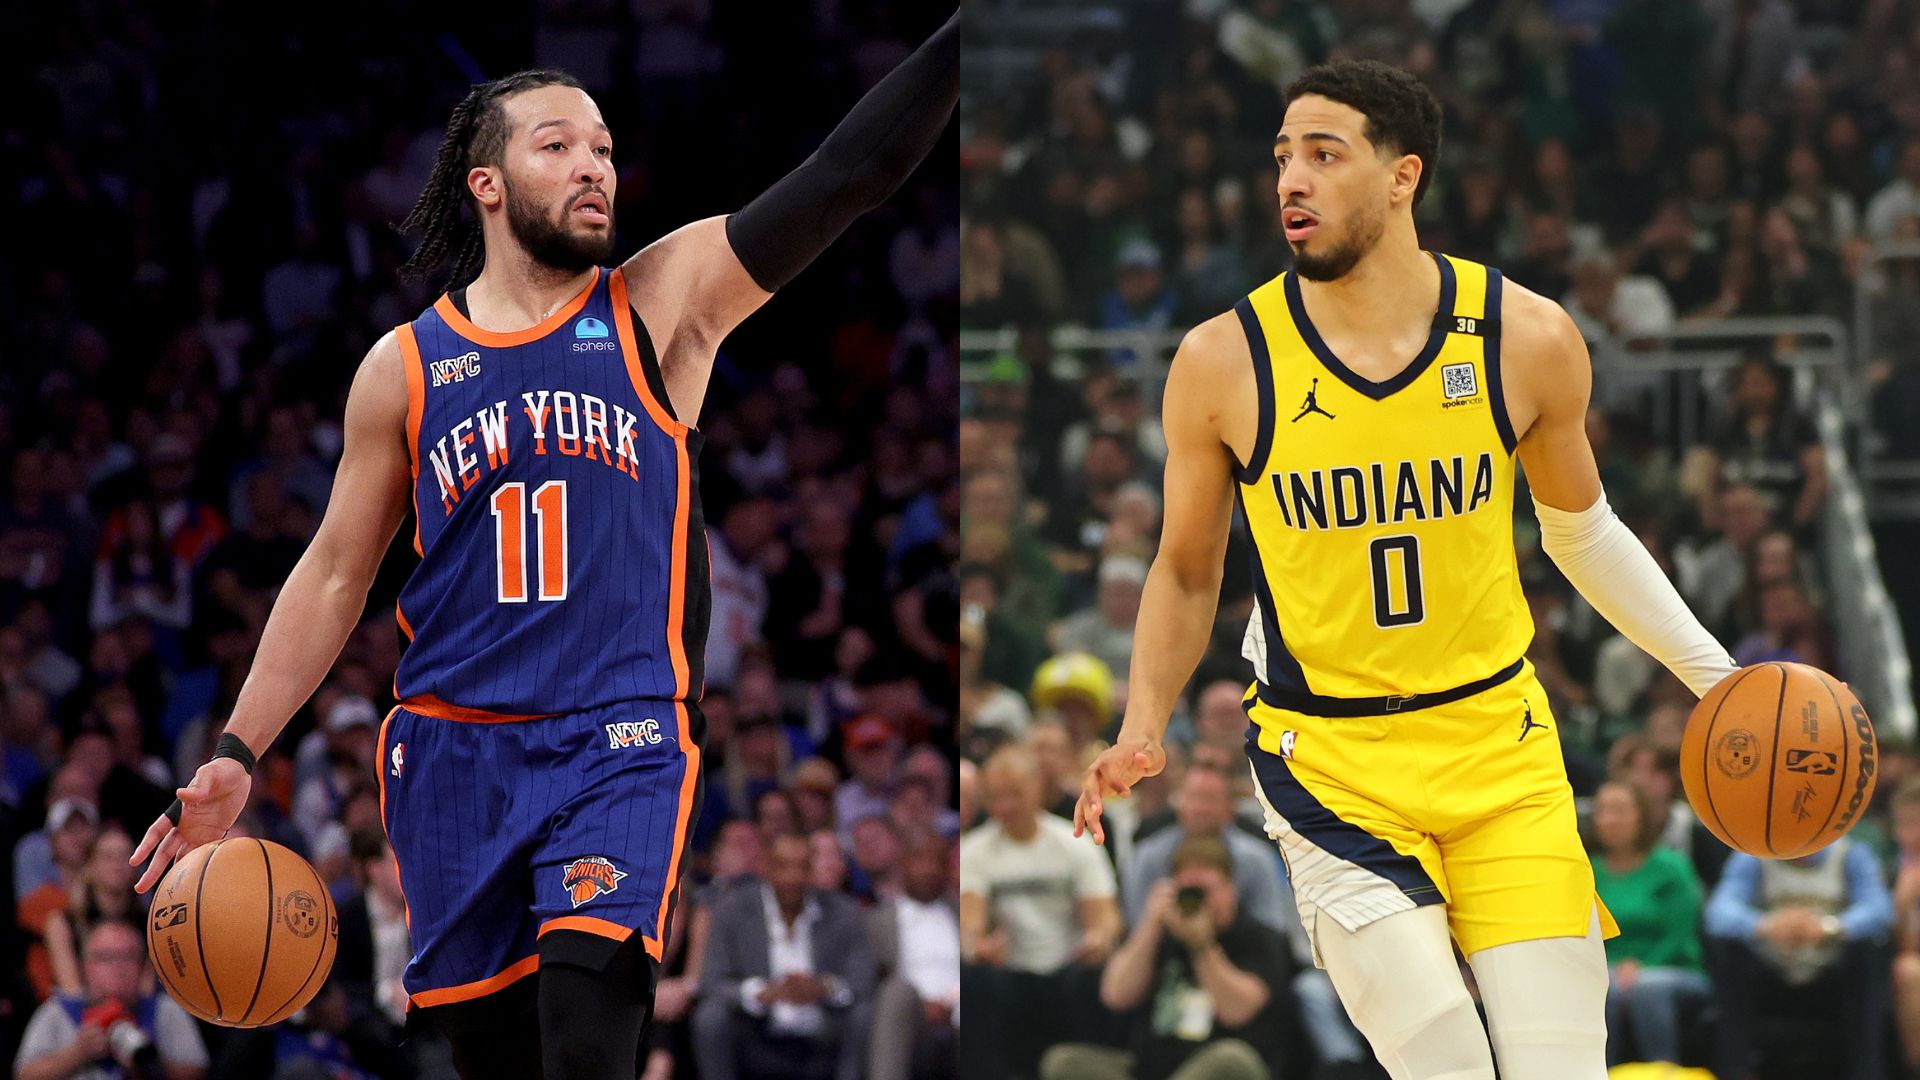 NEW YORK, NEW YORK - APRIL 30: Jalen Brunson #11 of the New York Knicks by Elsa/Getty Images | MILWAUKEE, WISCONSIN - APRIL 30: Tyrese Haliburton #0 of the Indiana Pacers by Stacy Revere/Getty Images